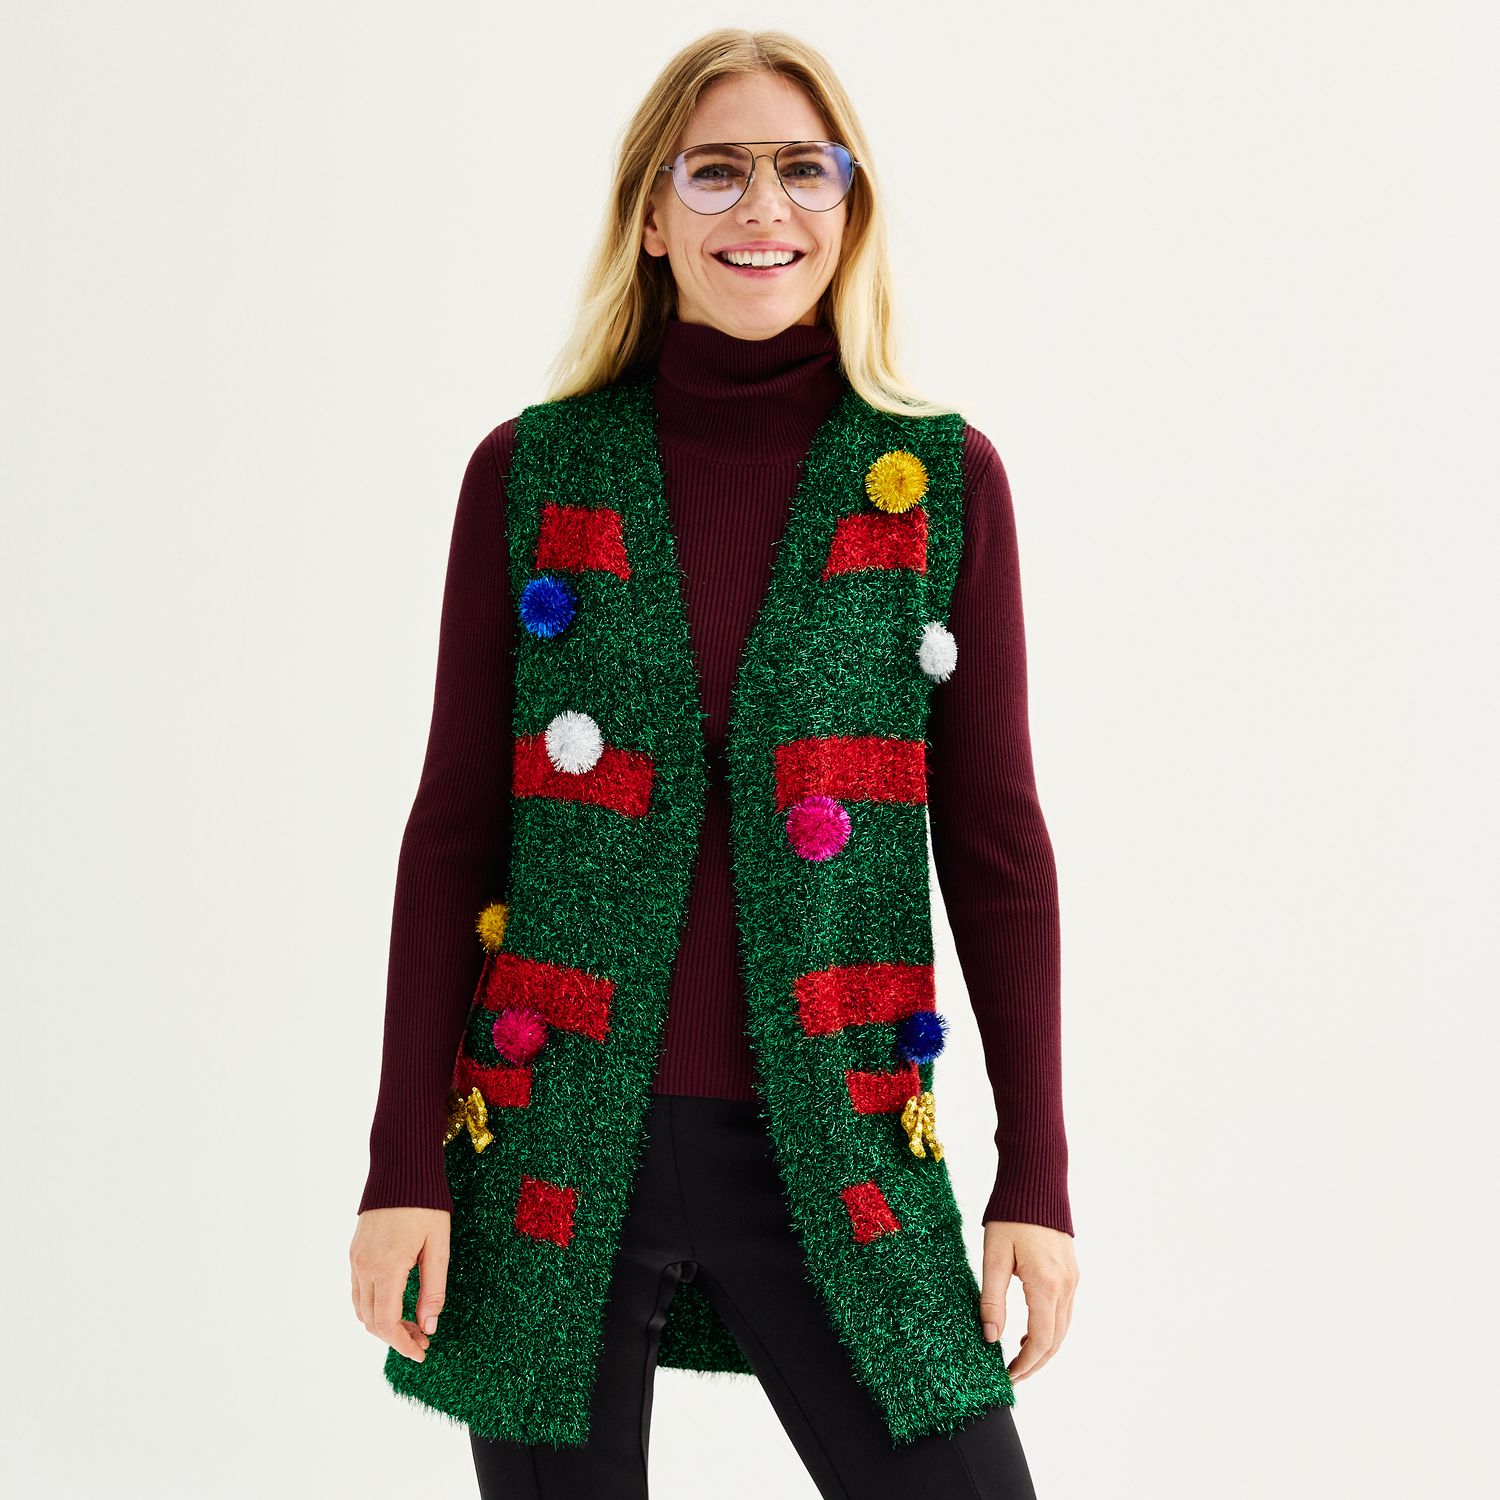 Unleash the Festive Fun: An Ugly Sweater Extravaganza with the Collection at Kohl’s